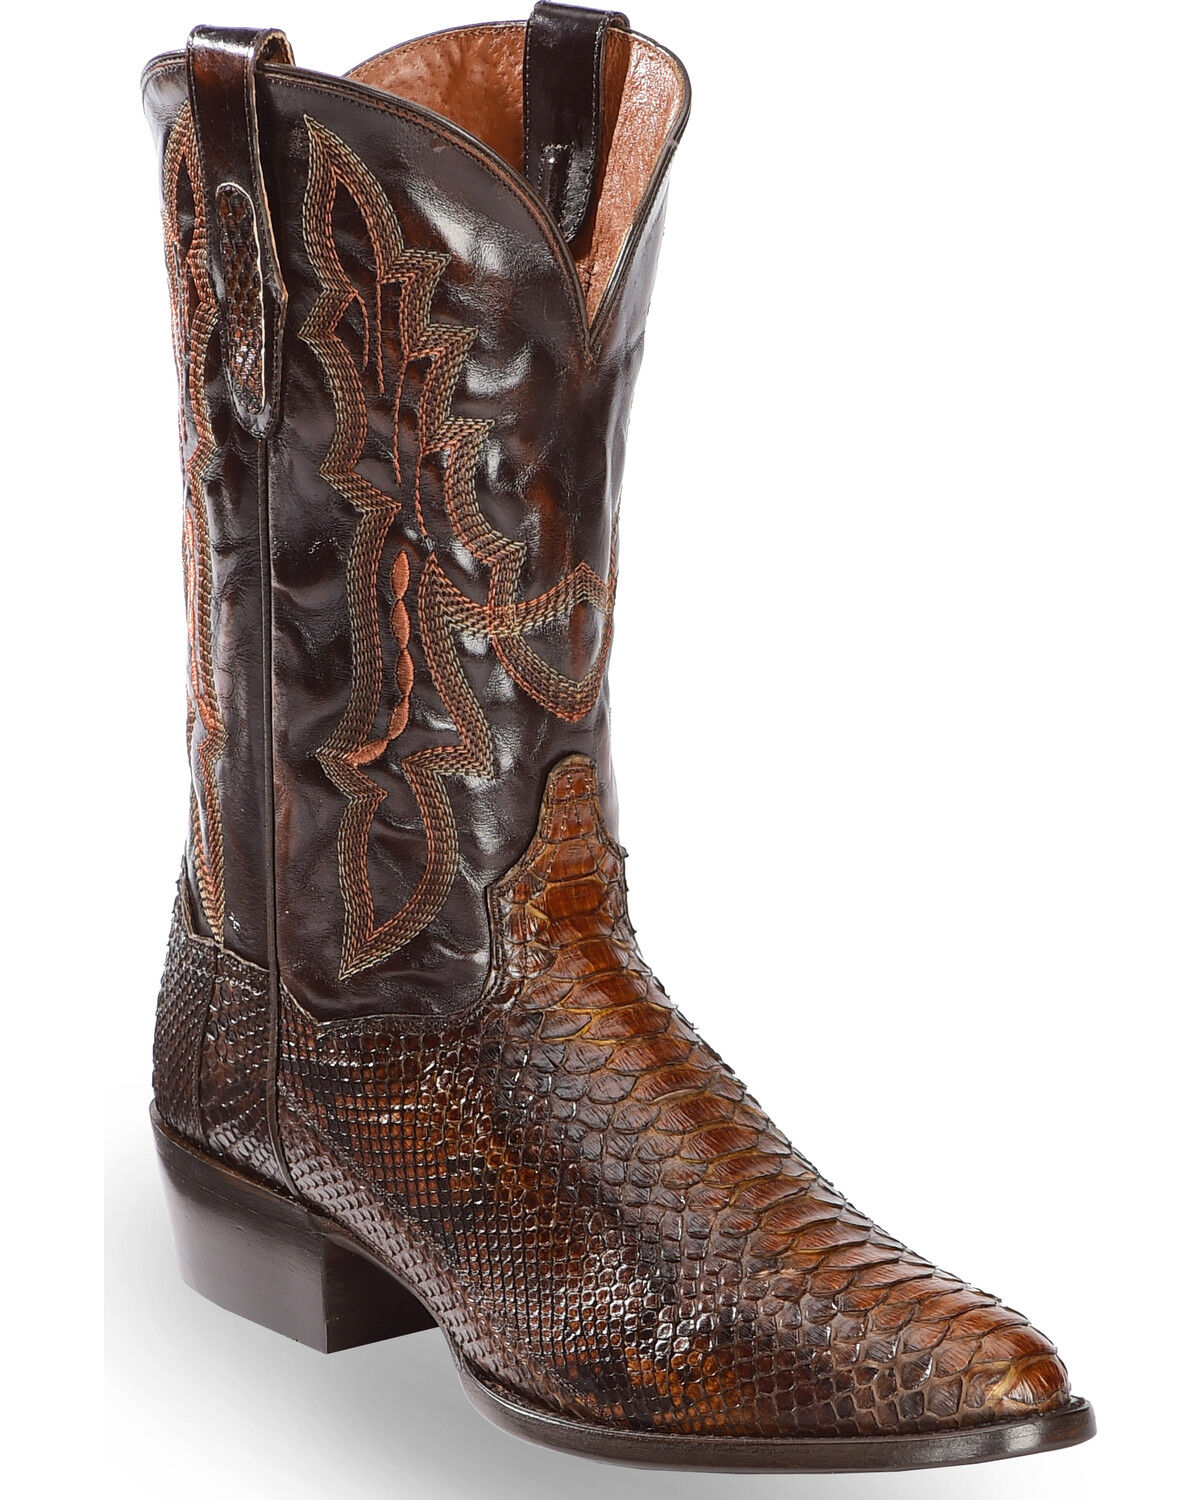 best exotic leather for cowboy boots